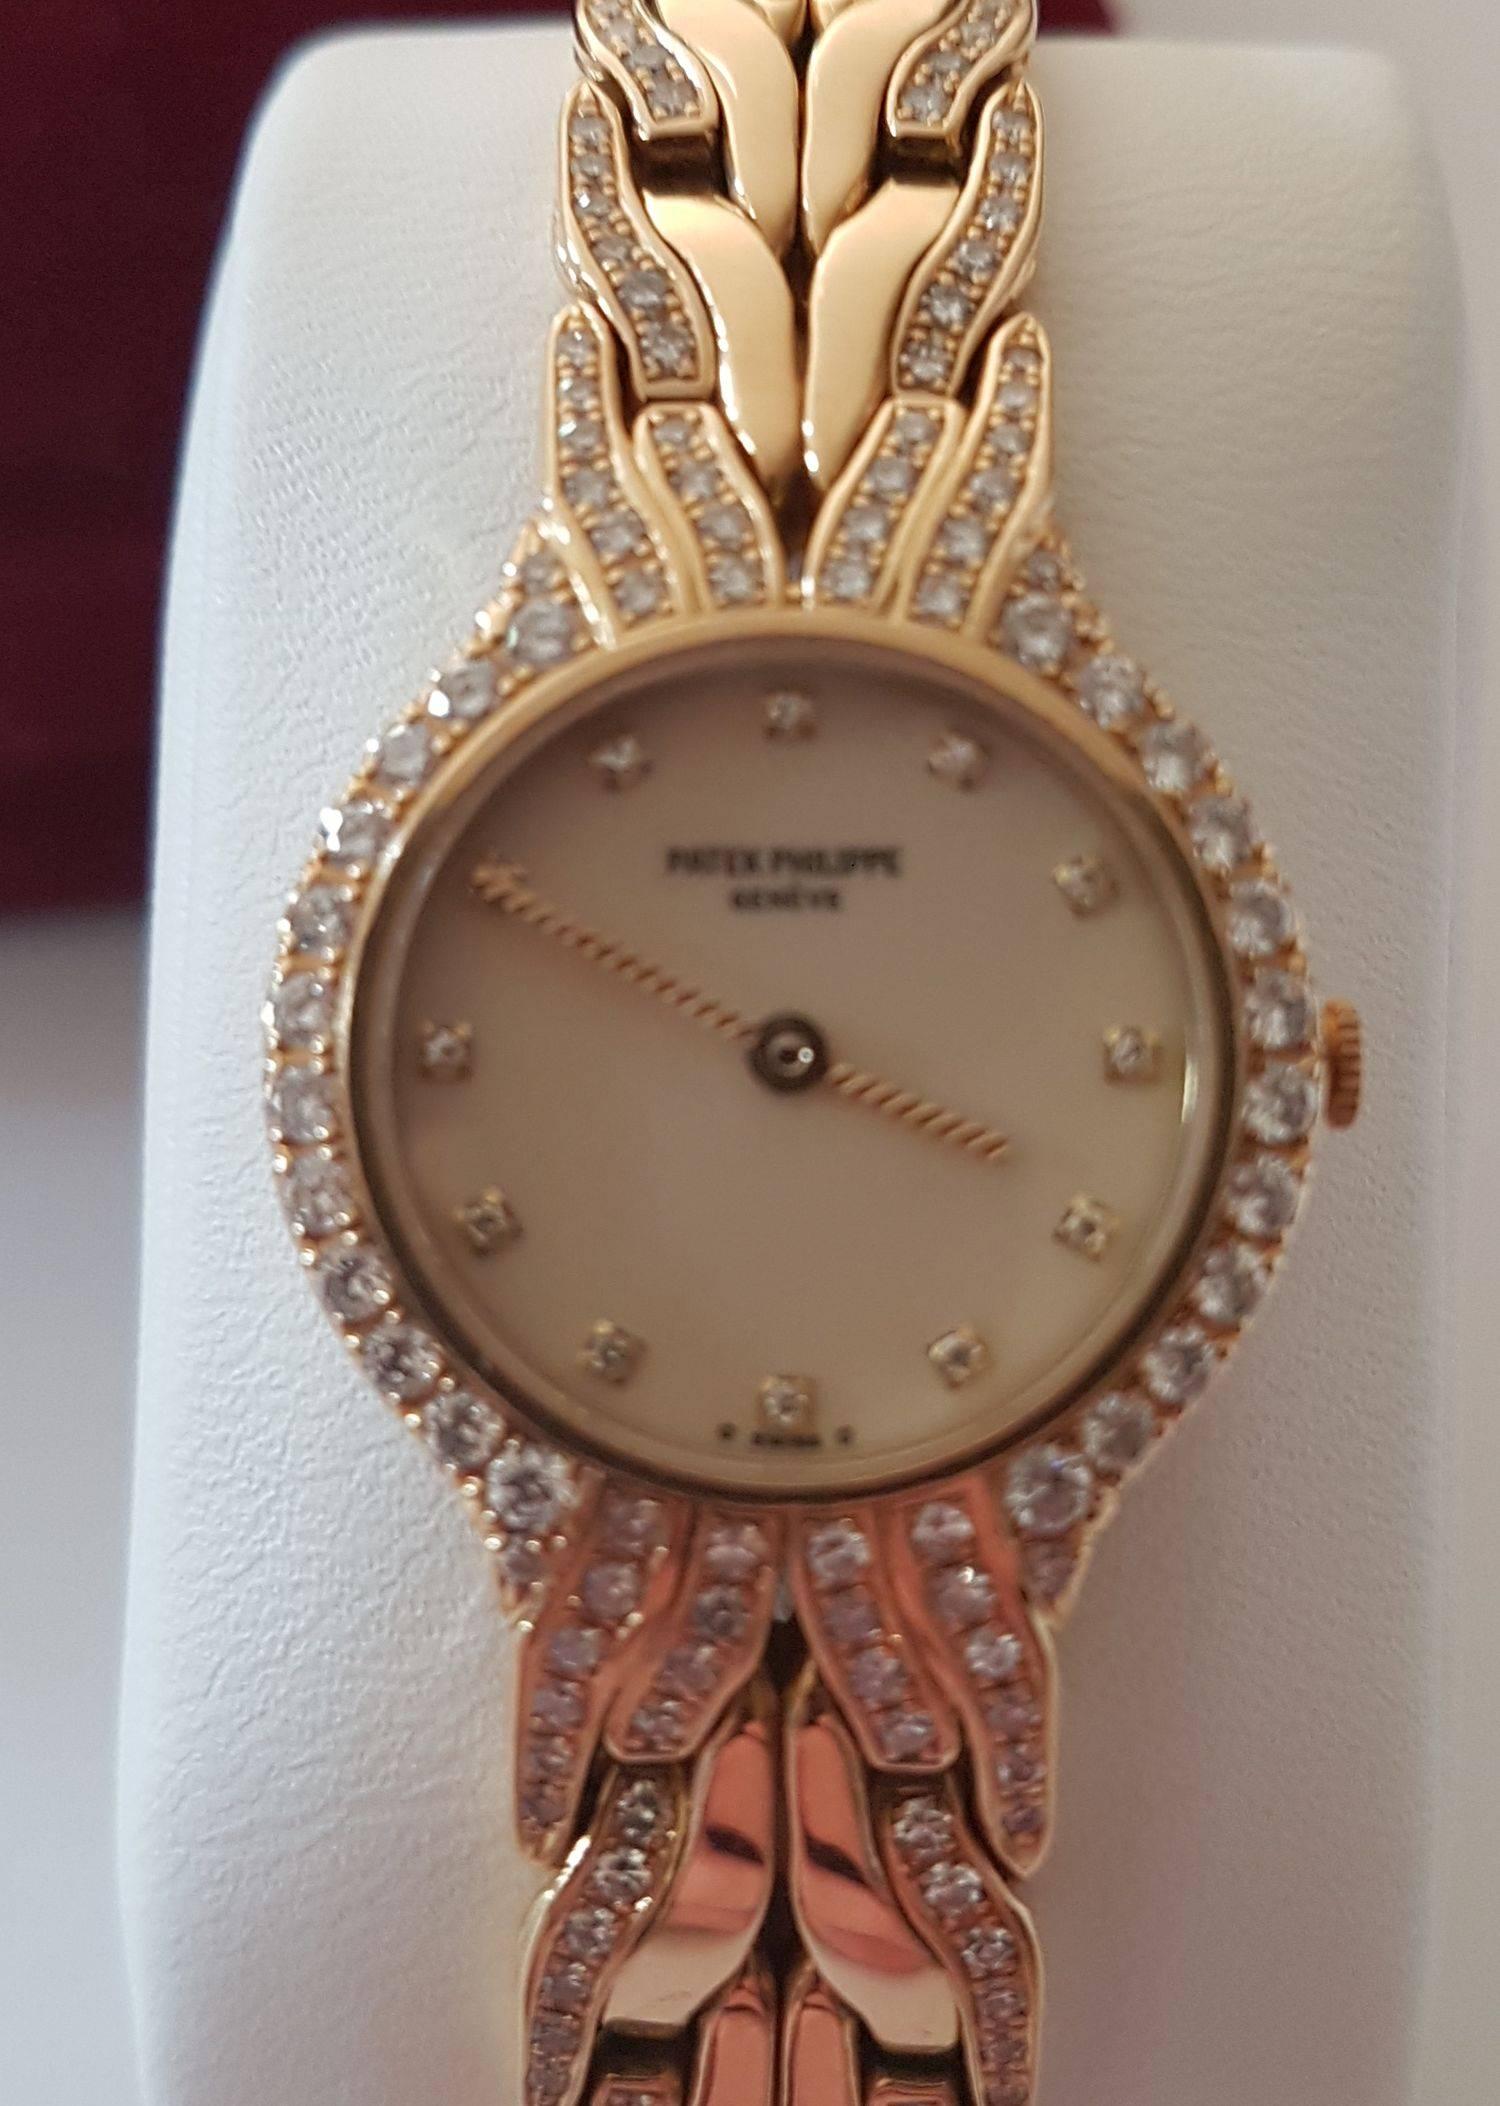 Stunning ladies Patek Philippe La Flame diamond set watch.  

This watch is in pristine condition and has diamond hour markers, a diamond bezel and diamond set bracelet.  It is 18 ct yellow gold and keeps perfect time.  The bracelet length is and